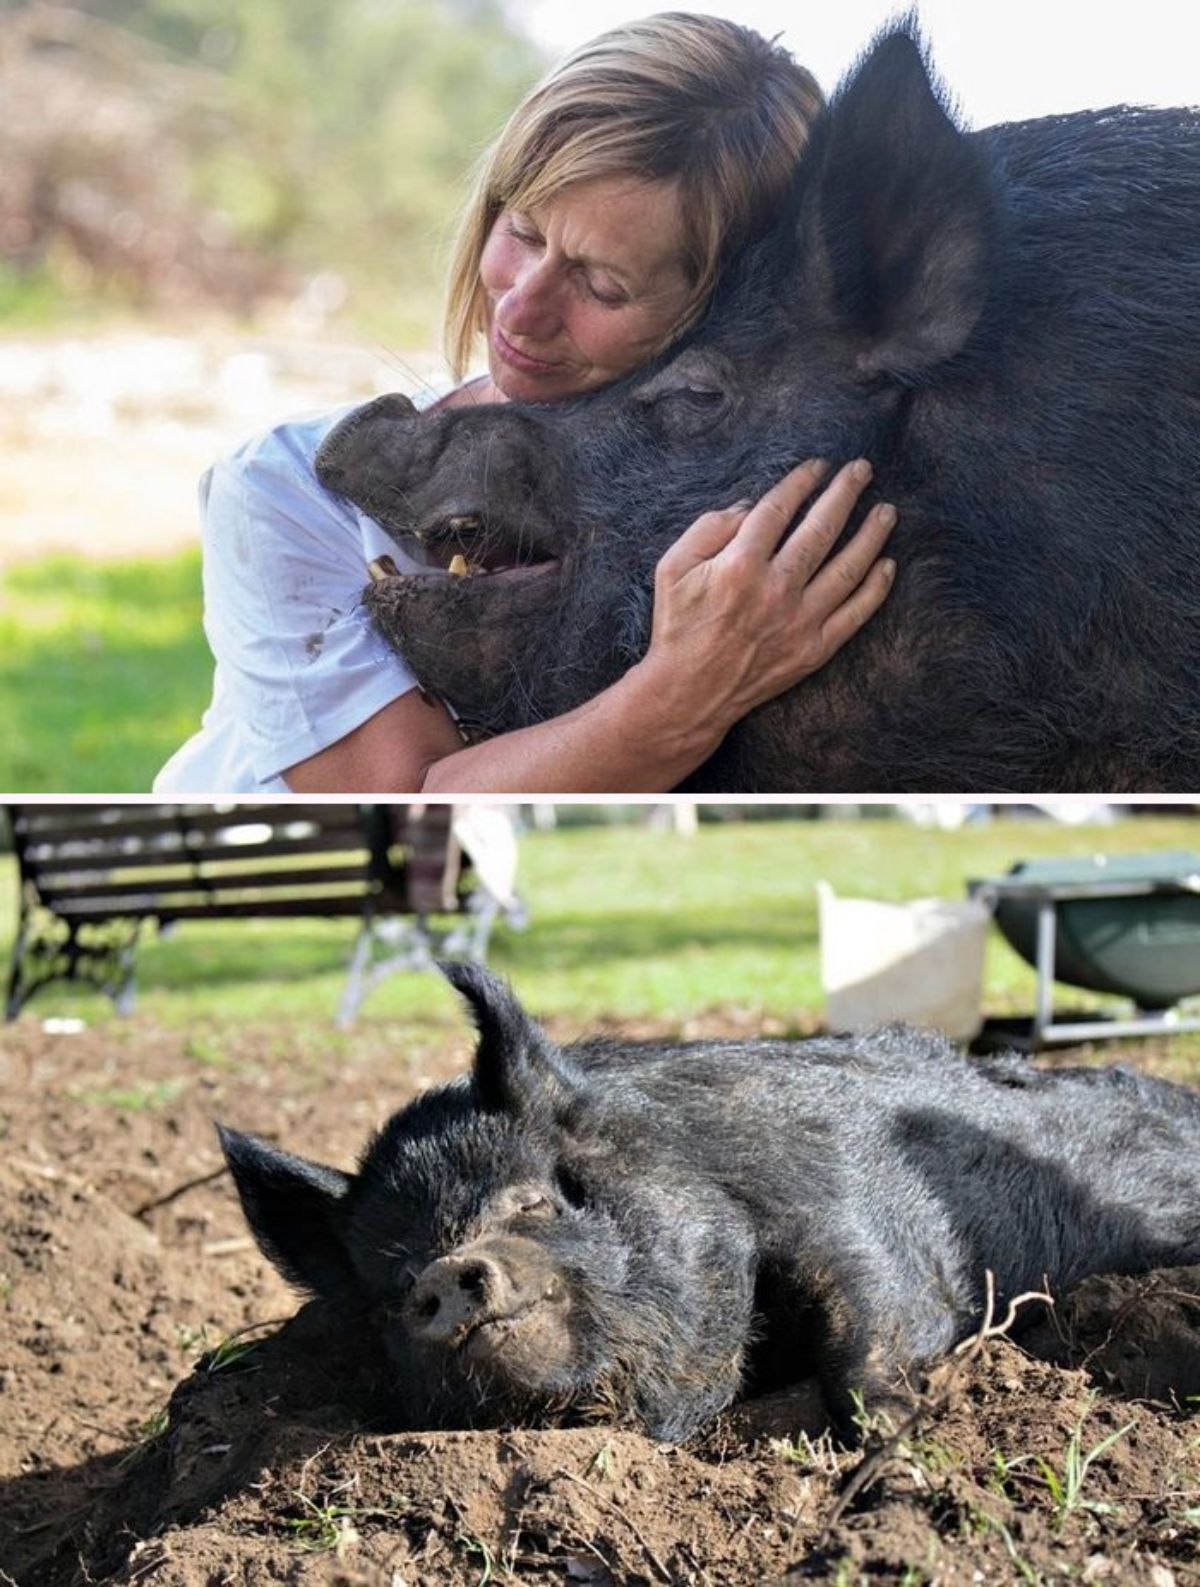 2 photos of a black pig being hugged by a woman and the black pig sleeping on mud